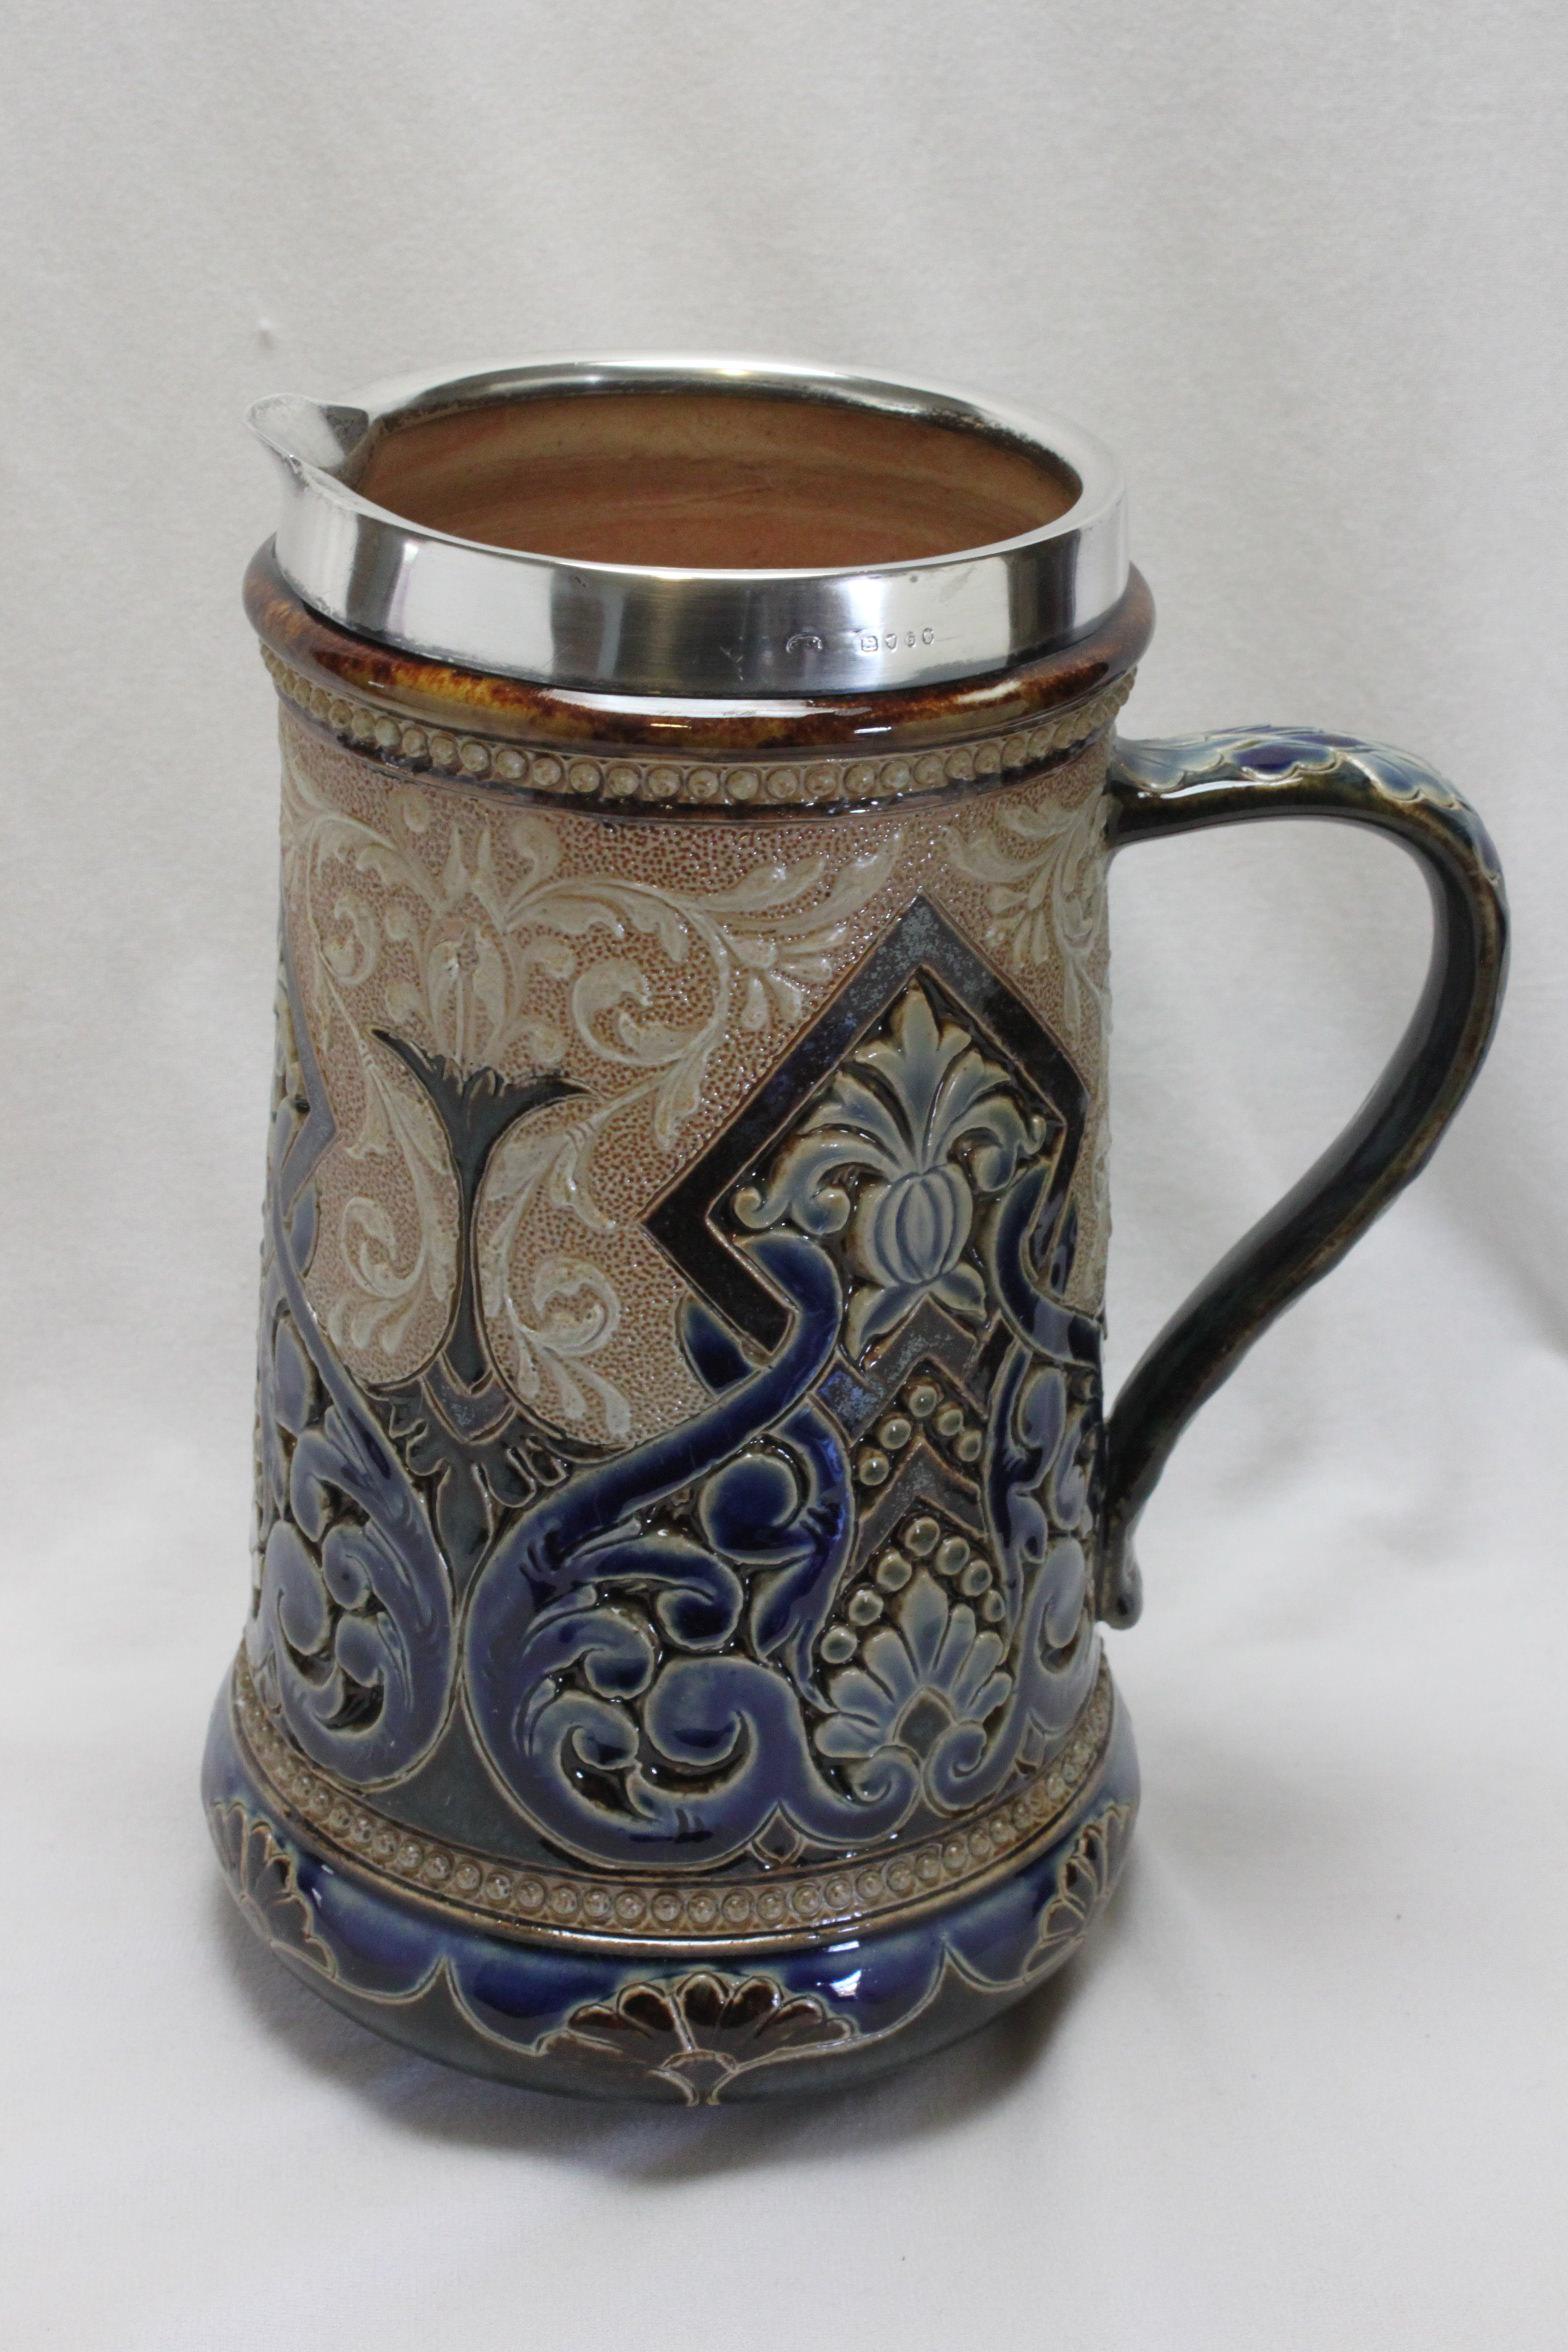 This Doulton Lambeth stoneware jug was by modelled by Eliza (or Elise as she later liked to be called ) Simmance who had a very long and very productive career at Doulton, starting in 1873 and retiring in 1928. All of the decoration on this jug was